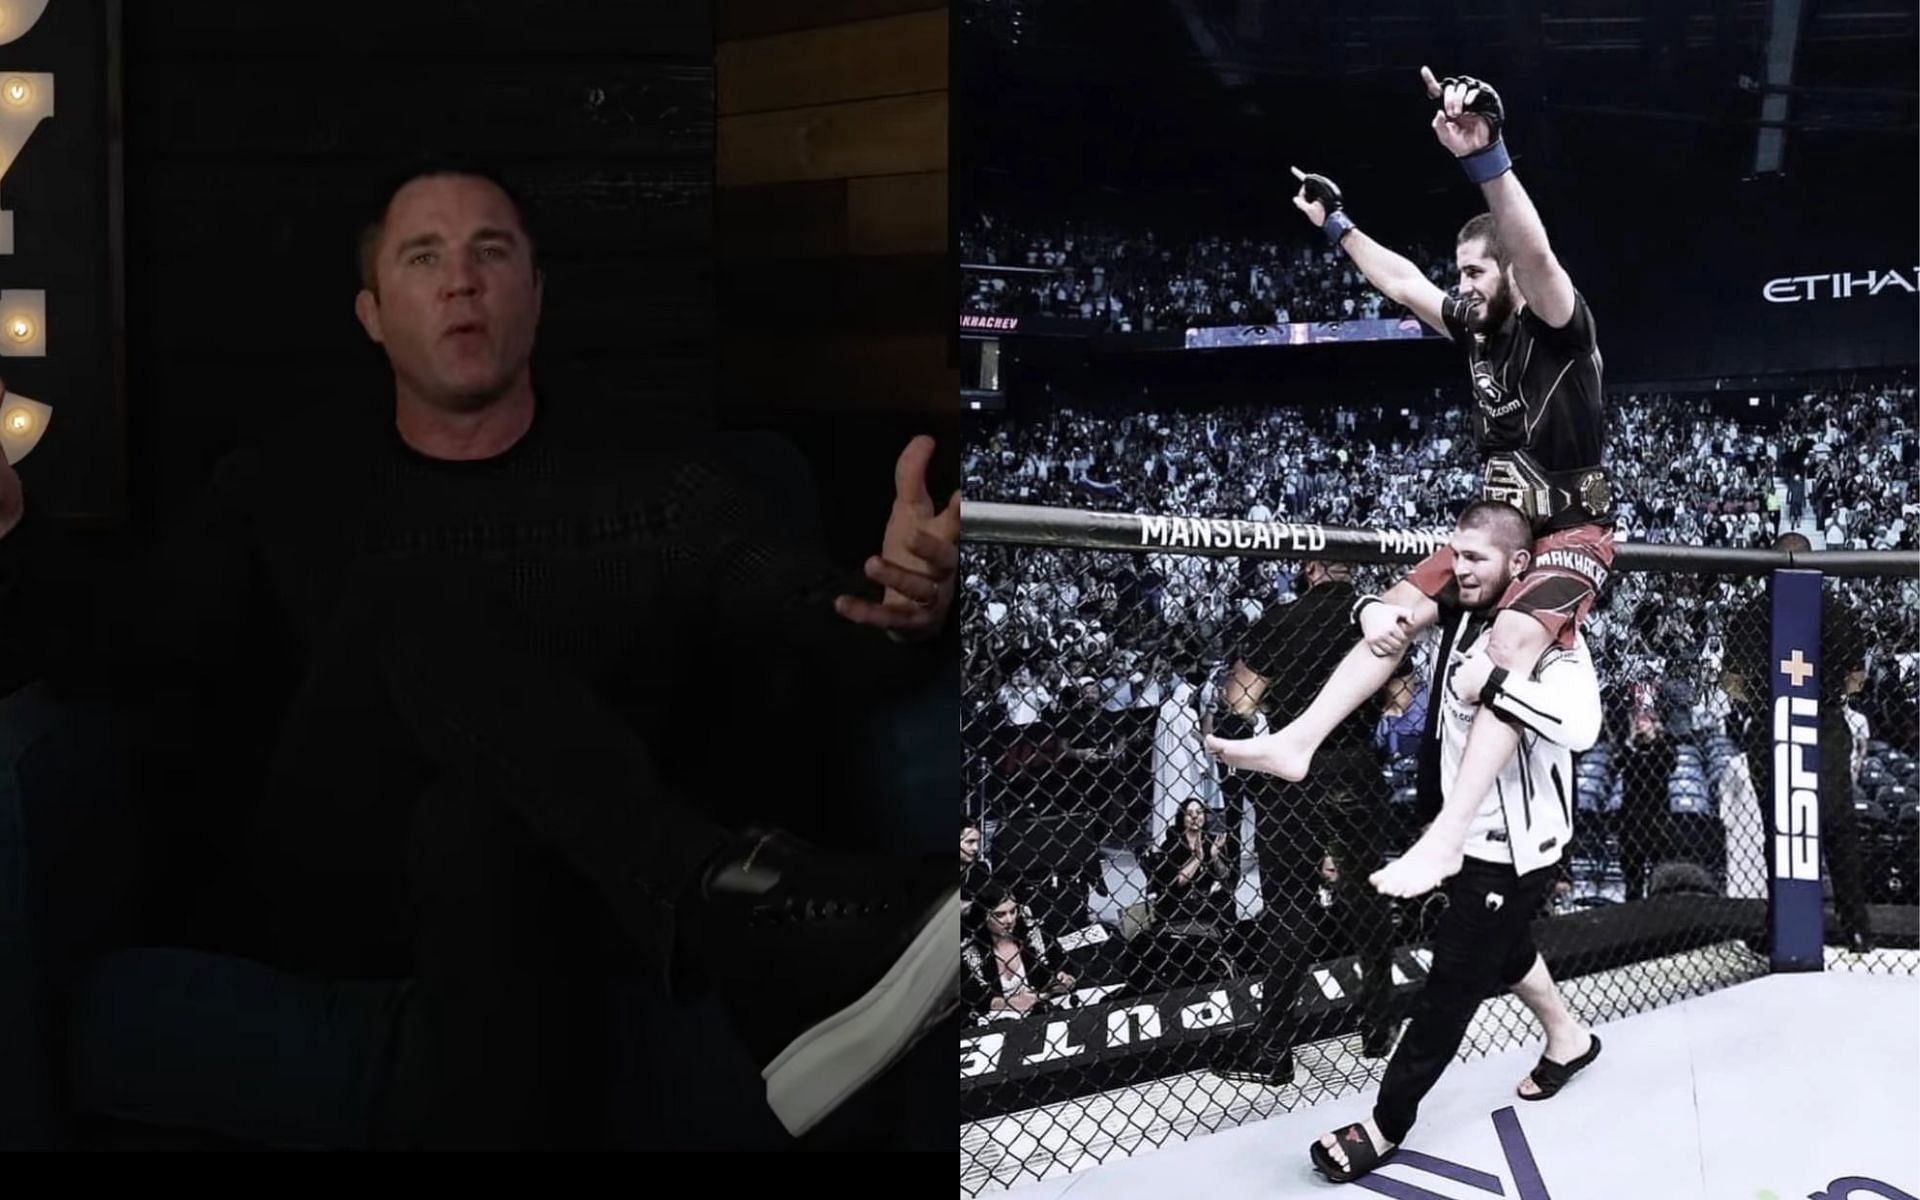 Chael Sonnen [Left] Khabib Nurmagomedov and Islam Makhachev at UFC 280 [Right] [Images courtesy: Chael Sonnen (YouTube) and @TeamKhabib (Twitter)]